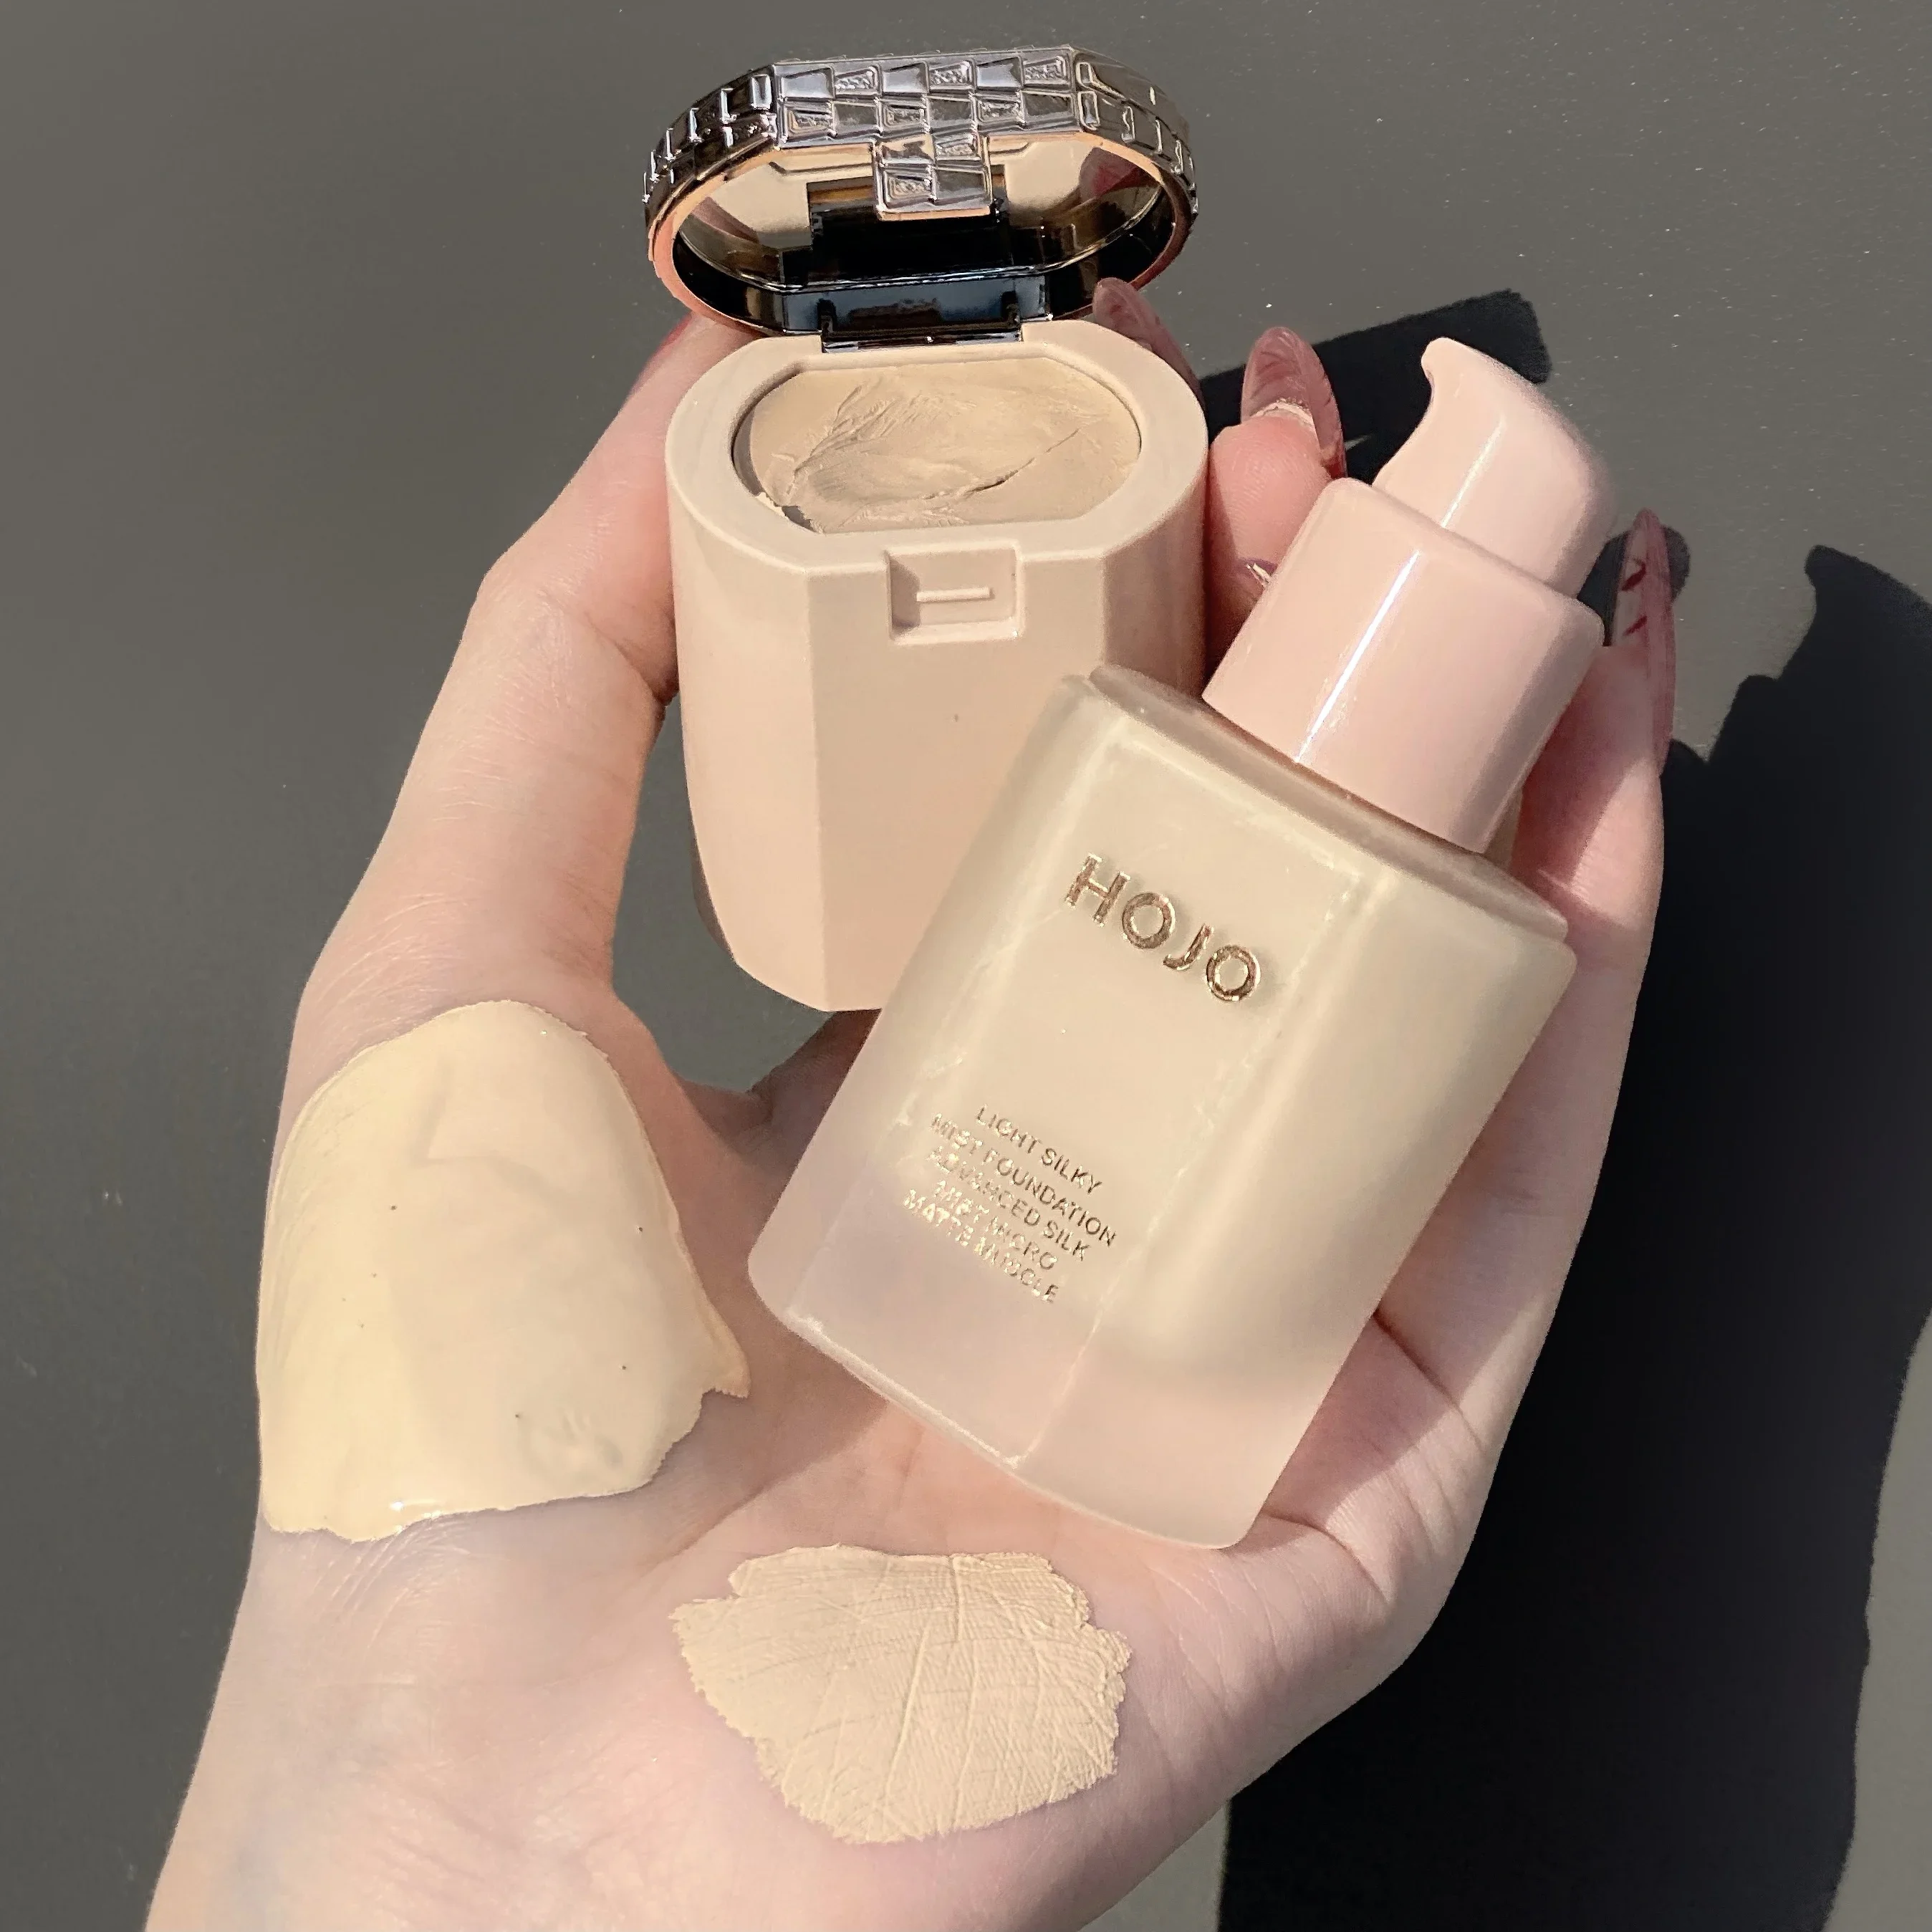 Hojo Liquid Foundation Female Concealer and Moisturizer Long-Lasting Oily Skin Dry Leather Student Cheap Long Lasting Smear-Proof Makeup Oil Control Makeup